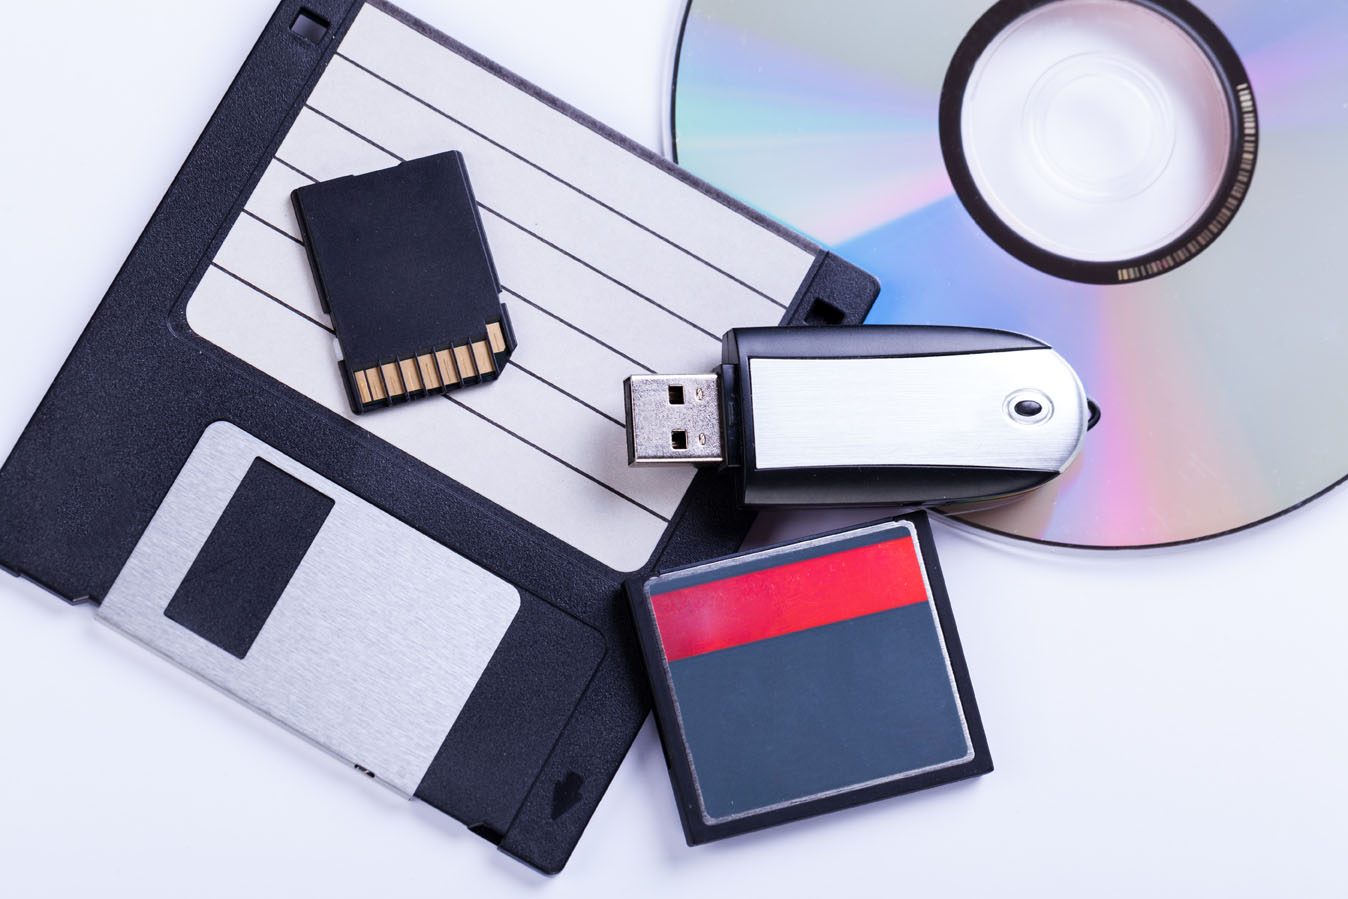 Selection of different computer storage devices